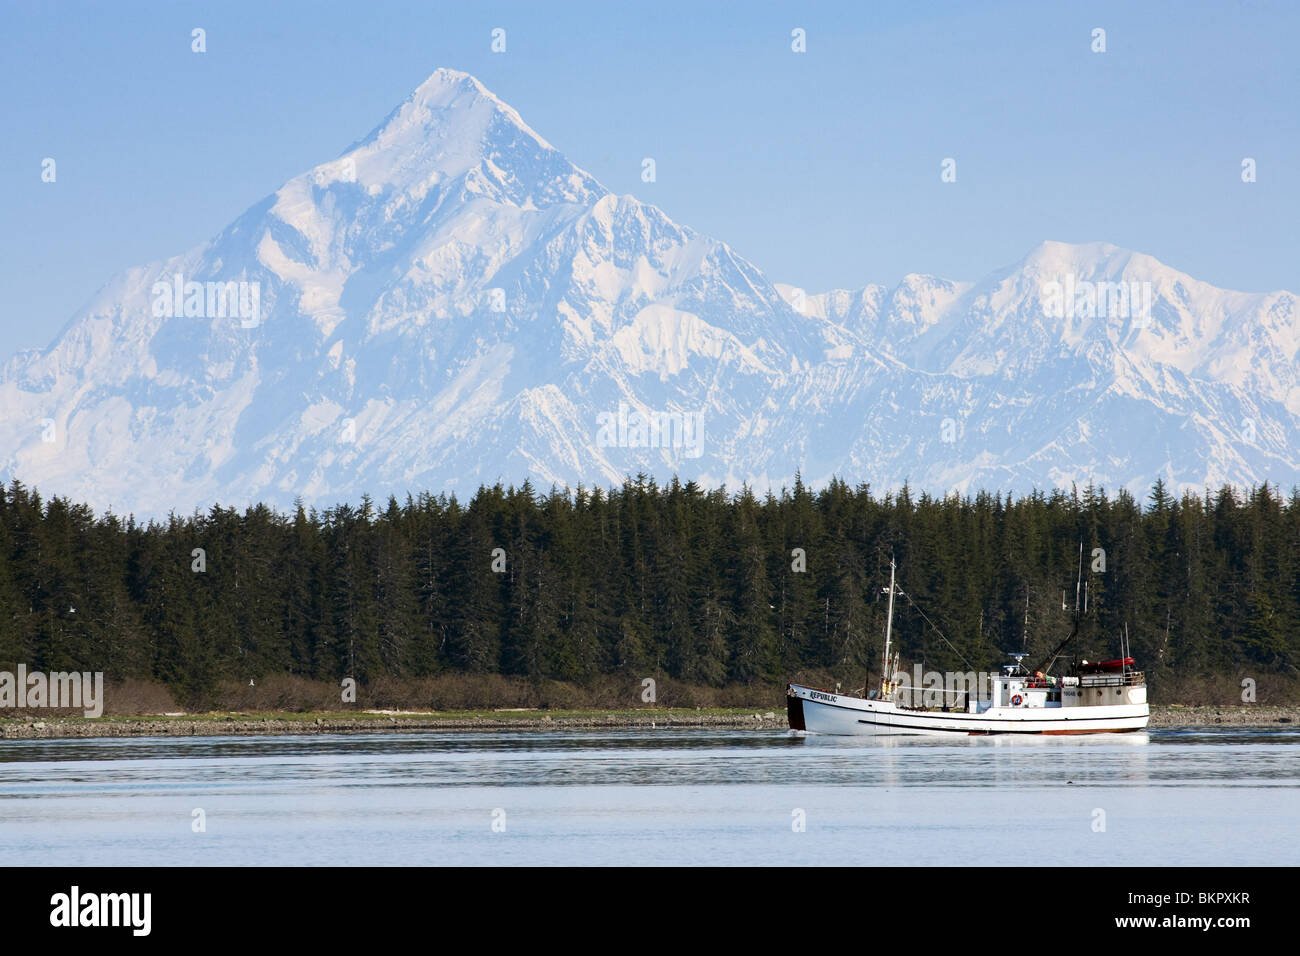 Scenic view of the St. Elias Range with a fishing schooner in the foreground near Yakutat, Alaska Stock Photo